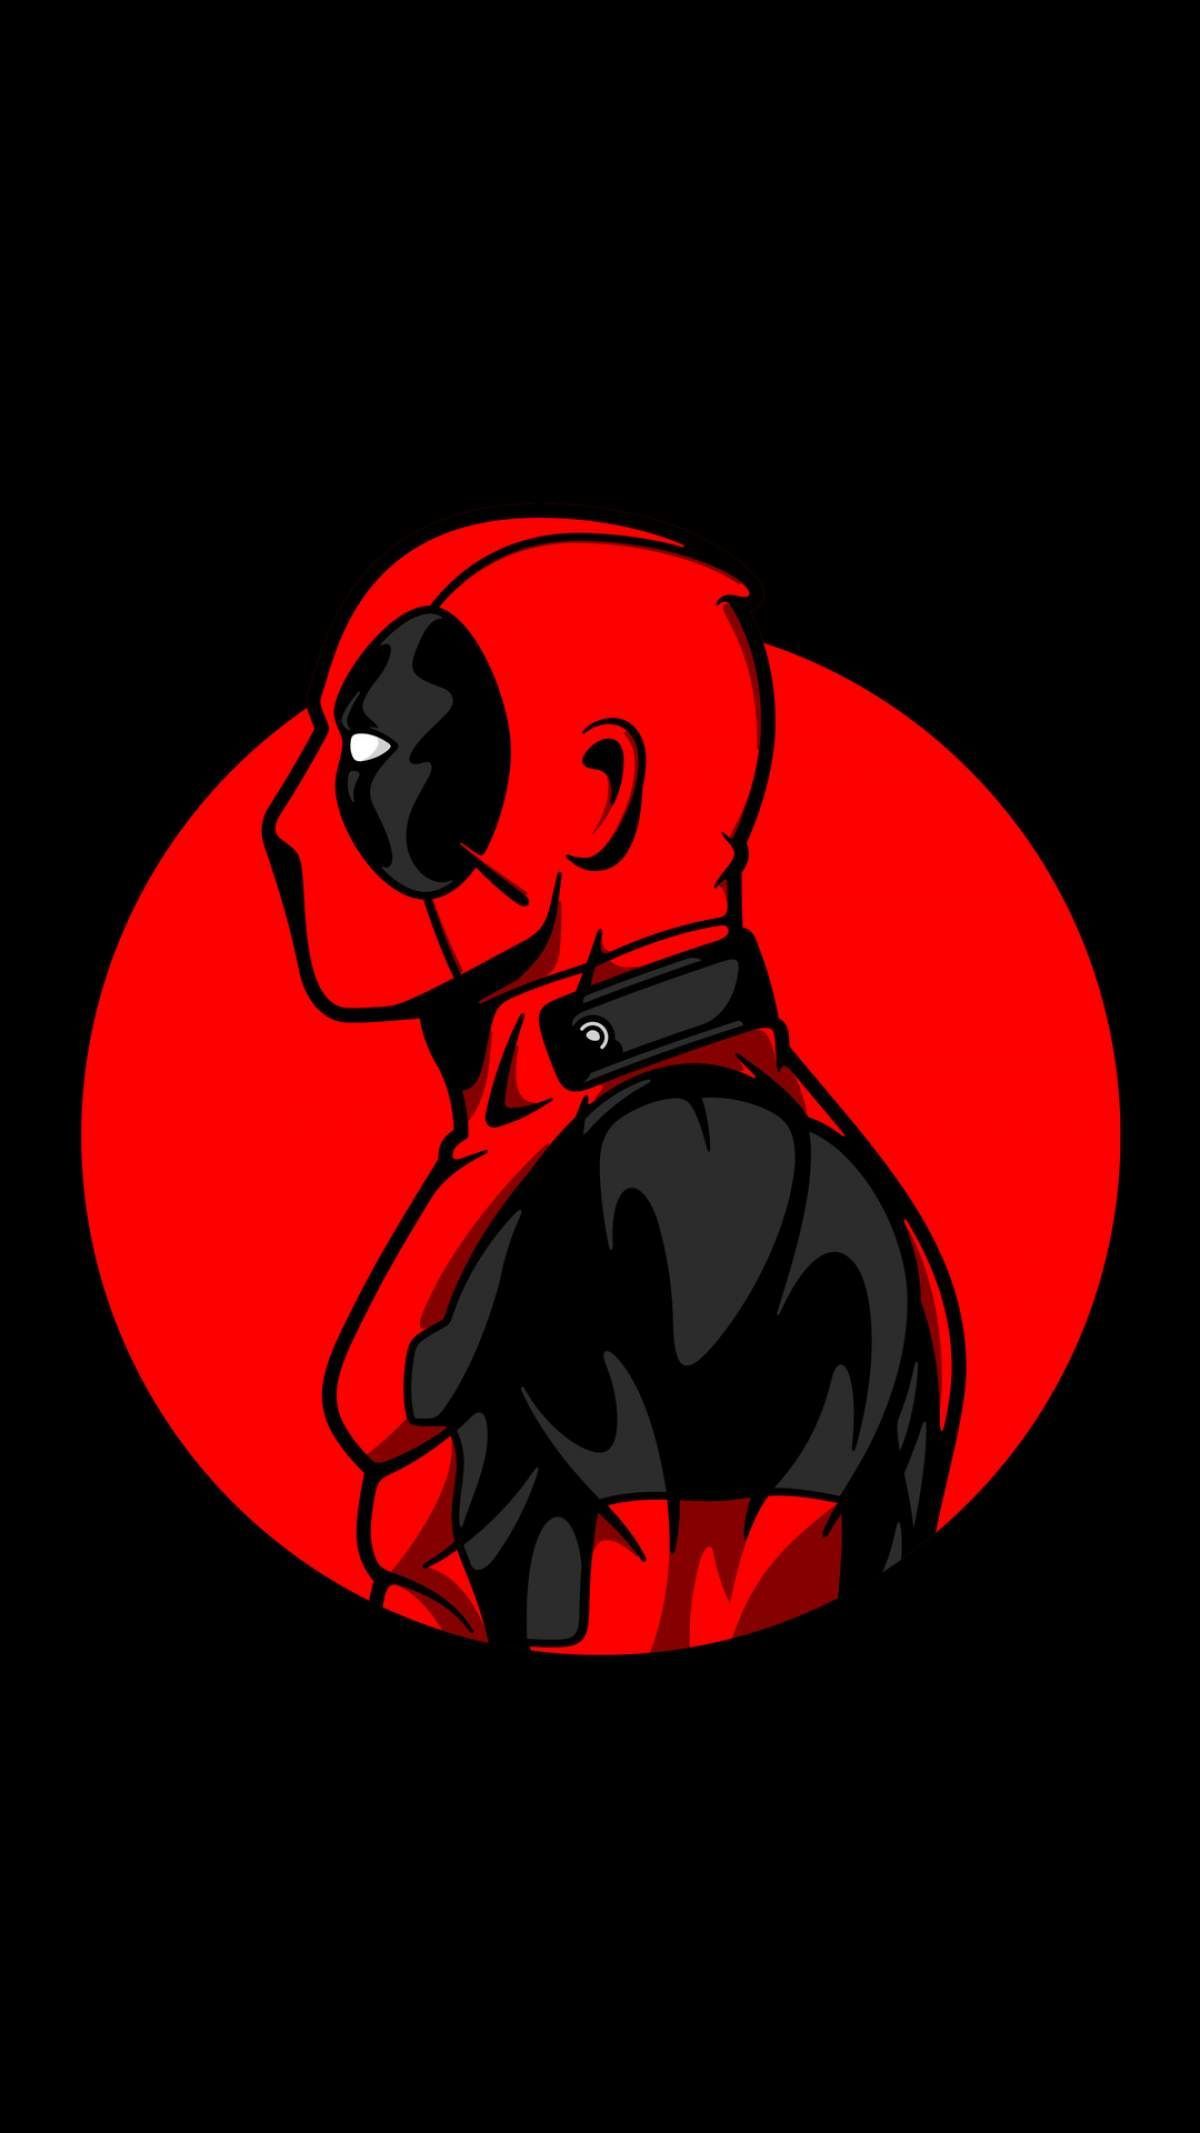 Download Deadpool Dark Amoled IPhone Wallpaper Top Free Awesome